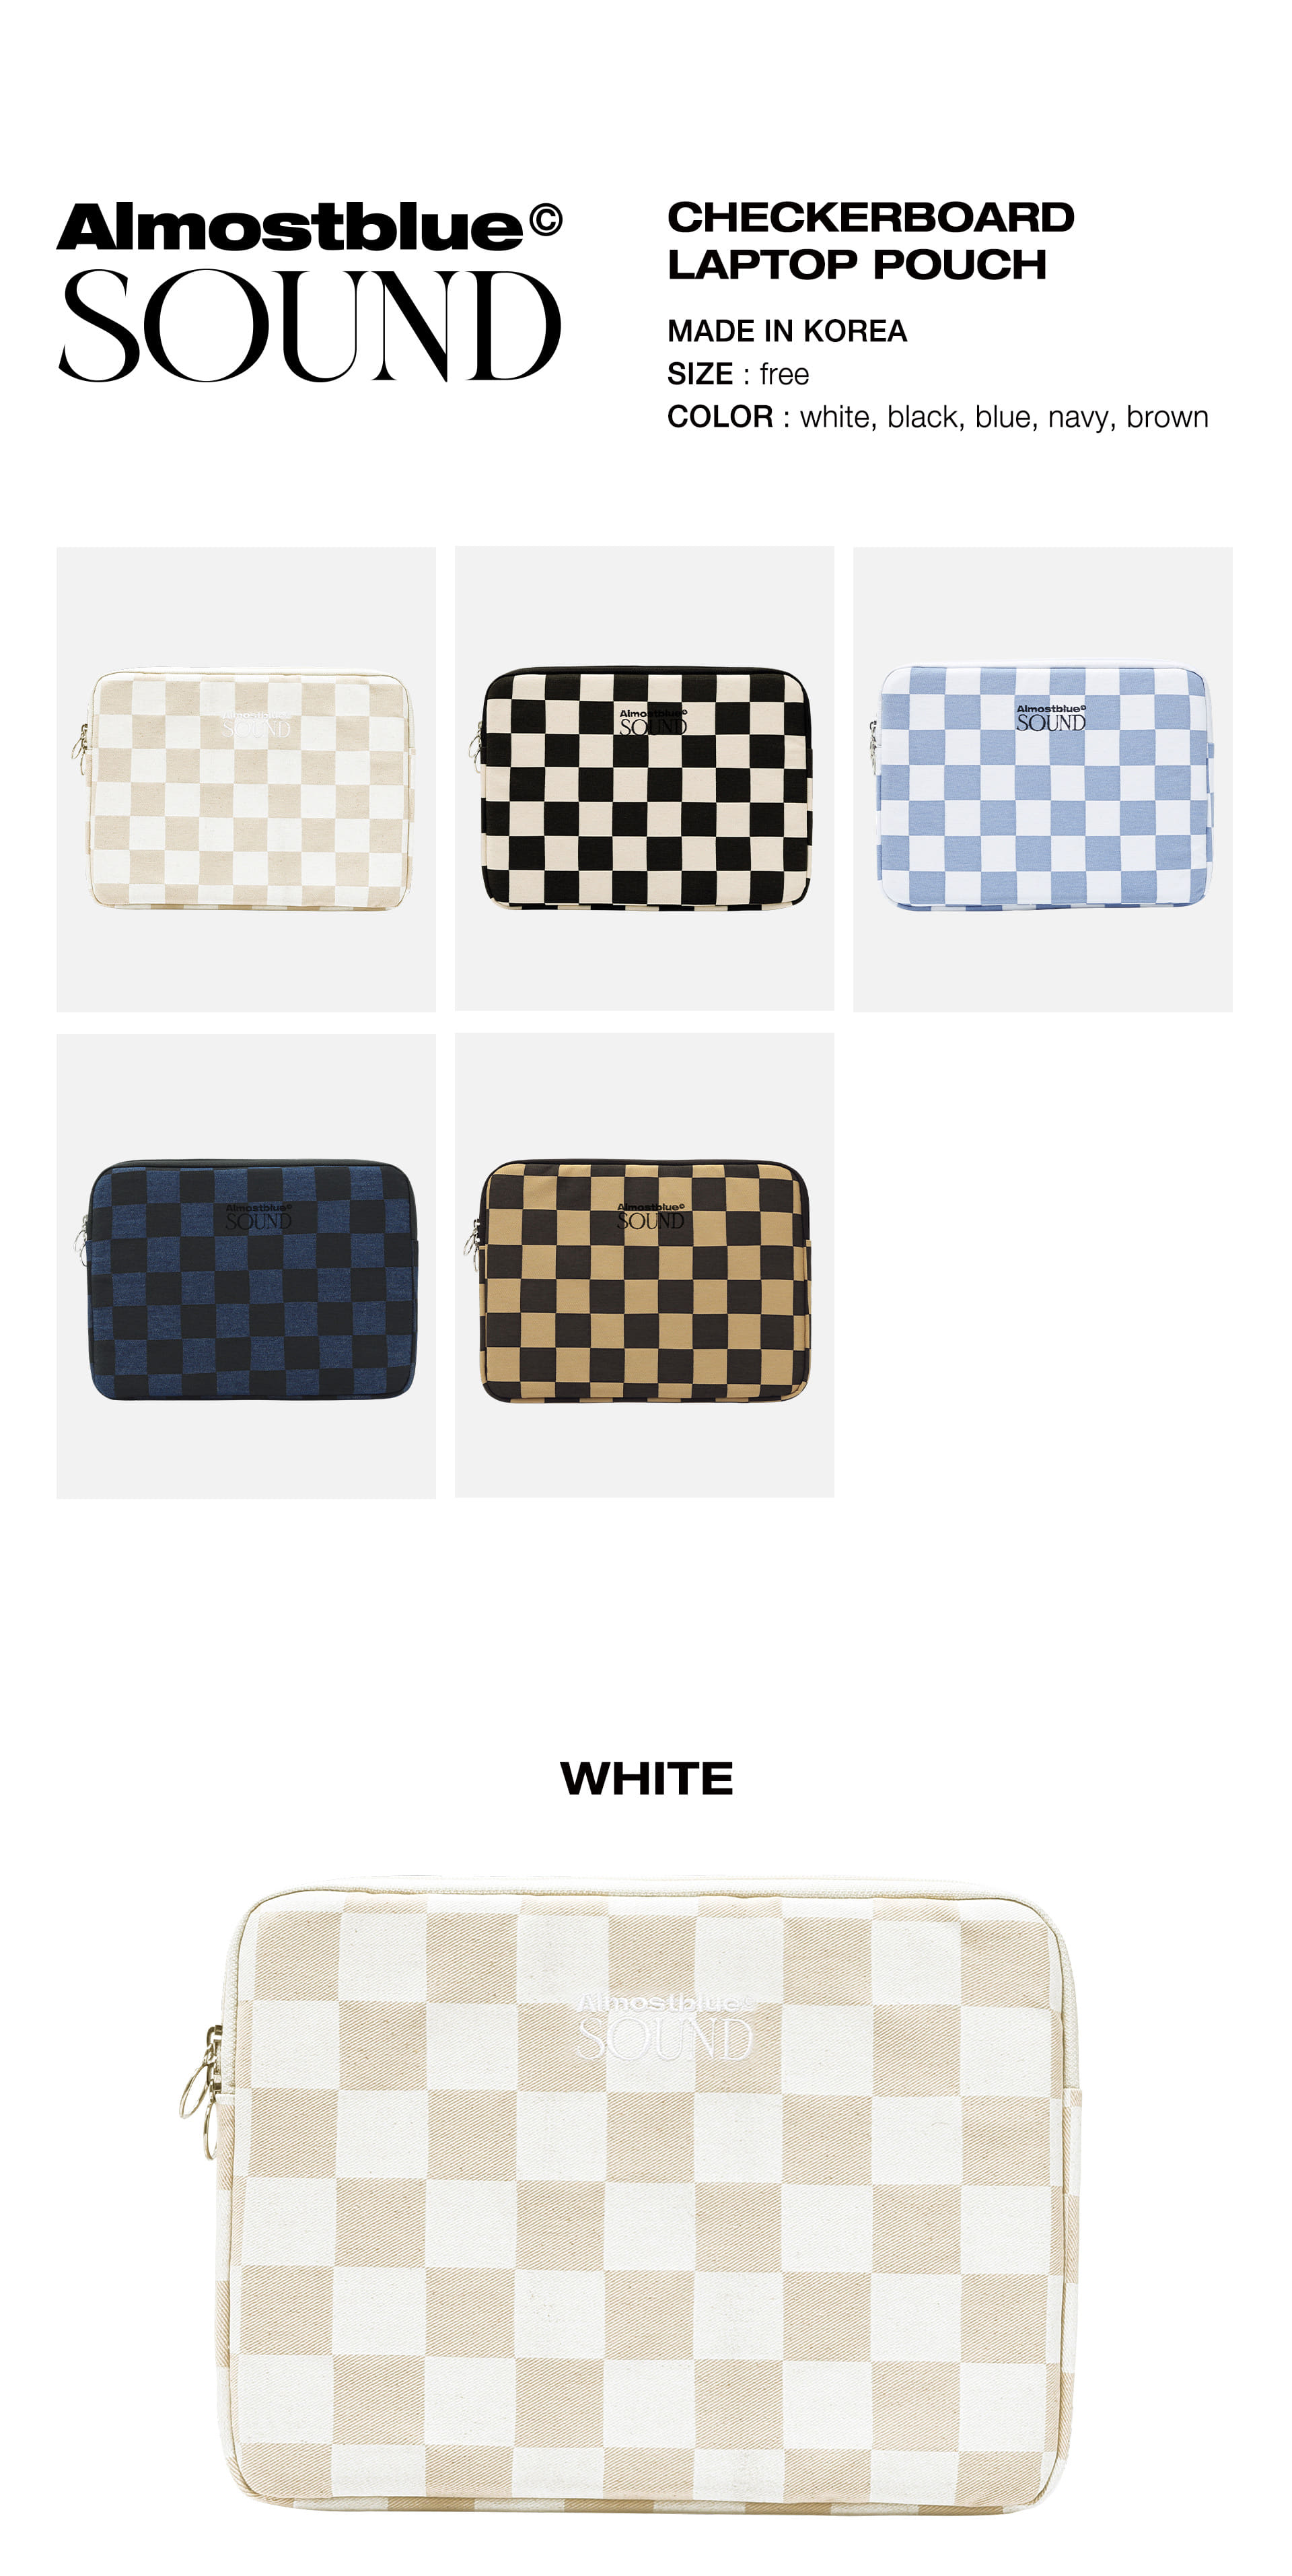 CHECKERBOARD LAPTOP POUCH